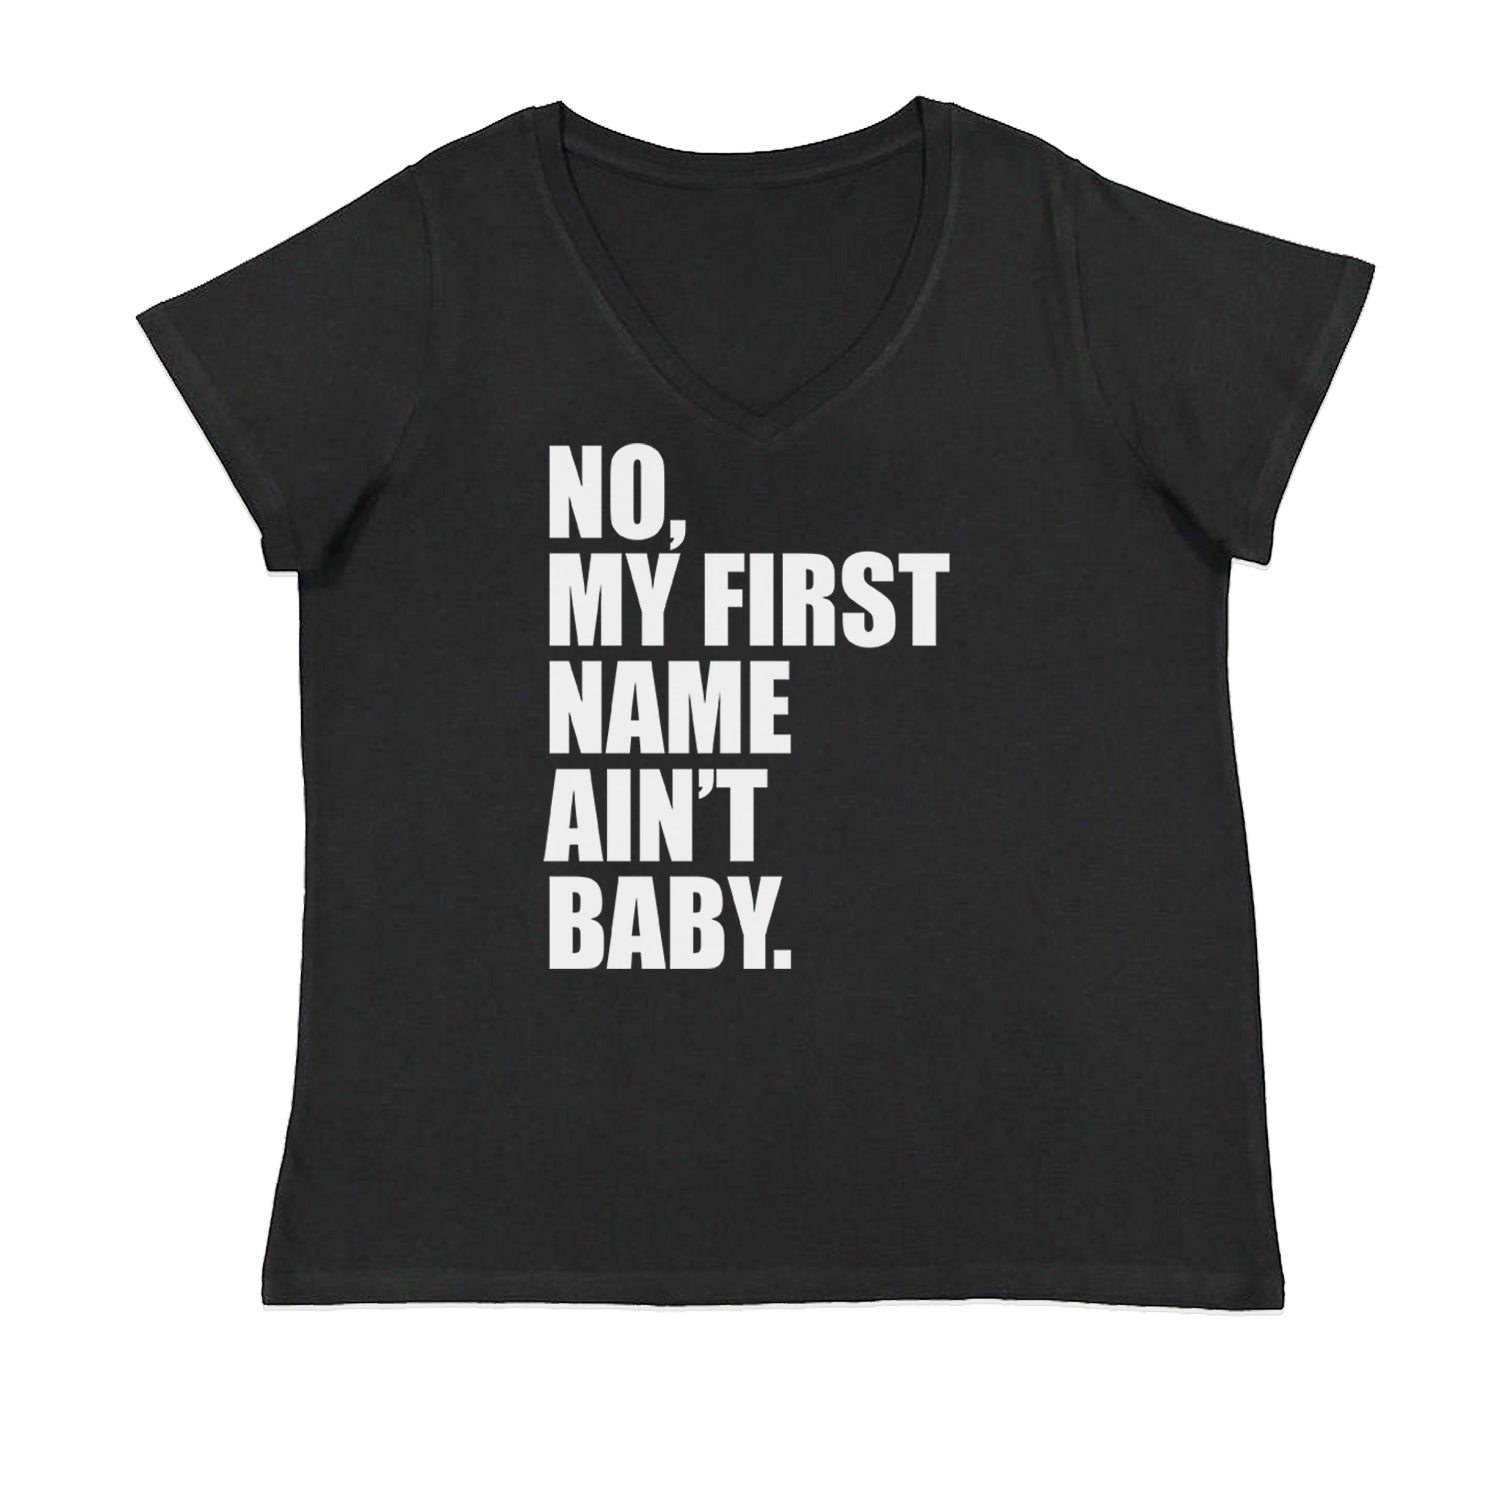 No My First Name Ain't Baby Together Again Ladies V-Neck T-shirt Black